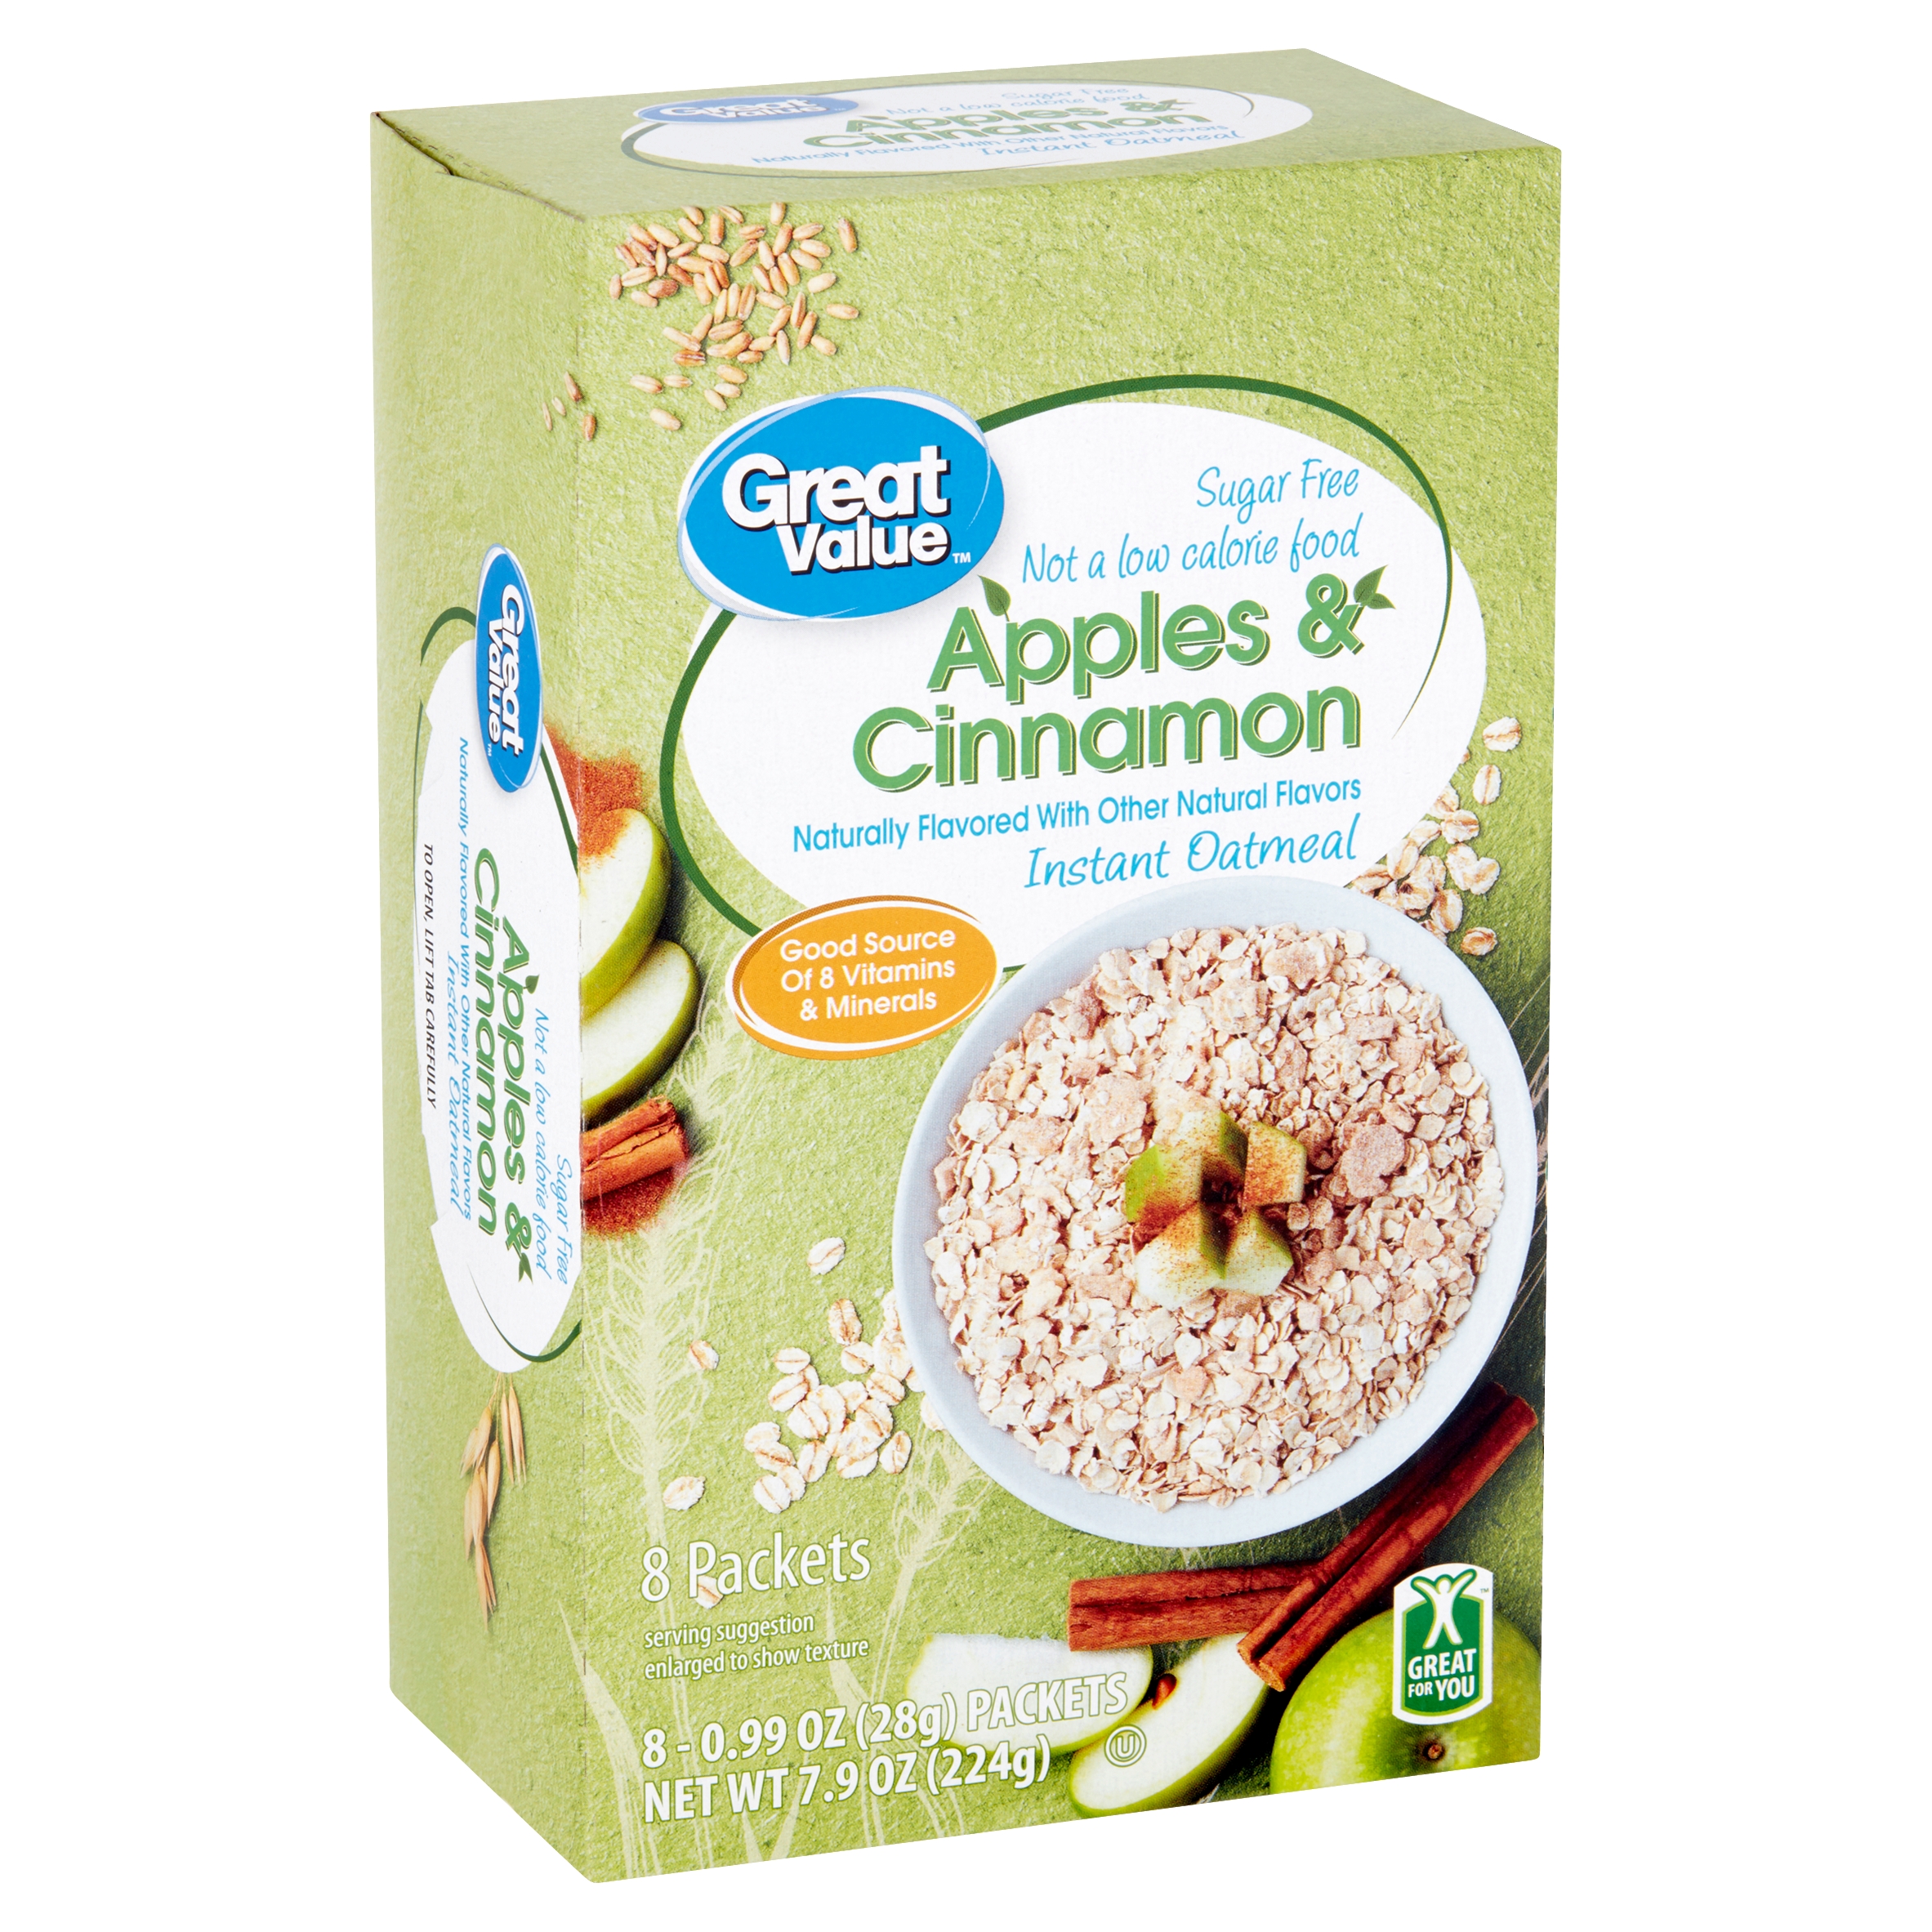 Great Value Apples & Cinnamon Instant Oatmeal, 0.99 Oz, 8 Count Image